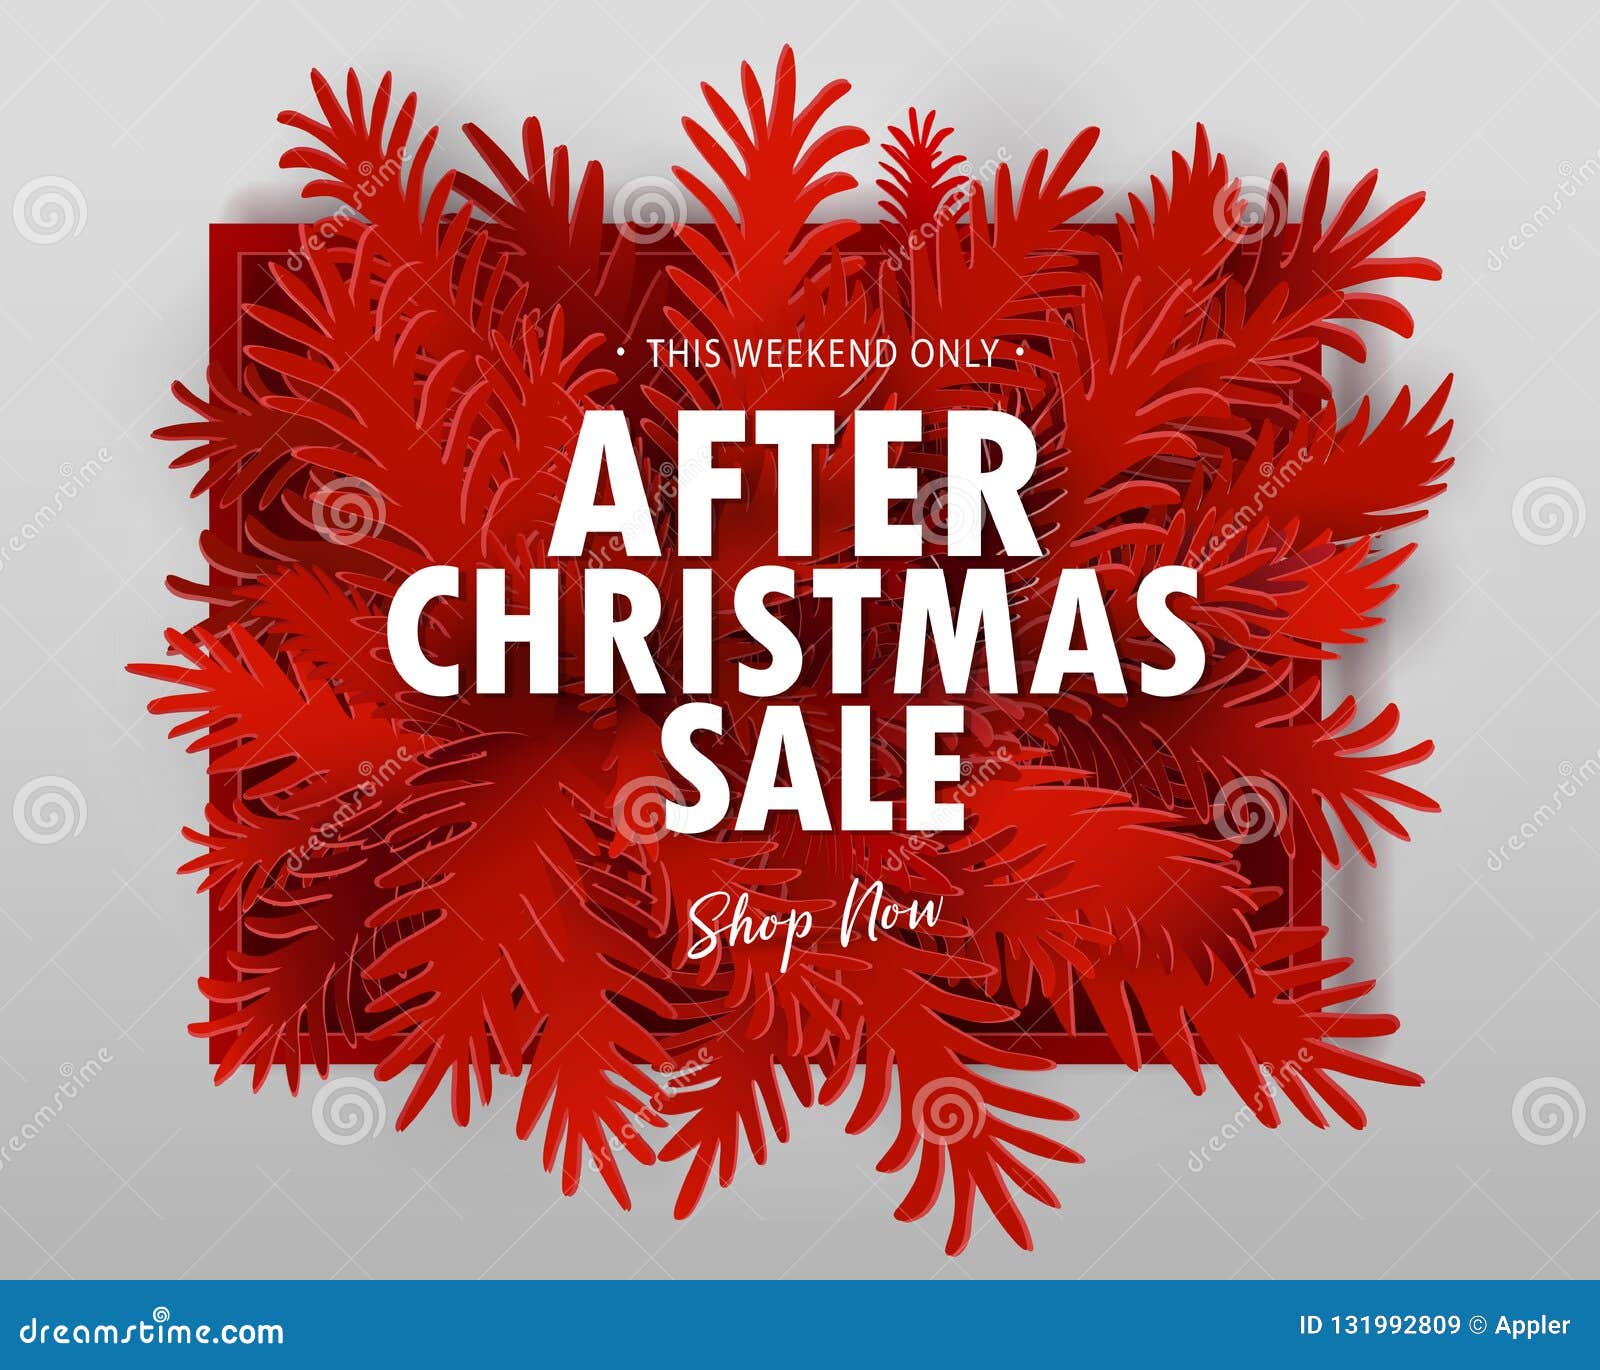 After Christmas Sale Banner Stock Vector Illustration of card, retail